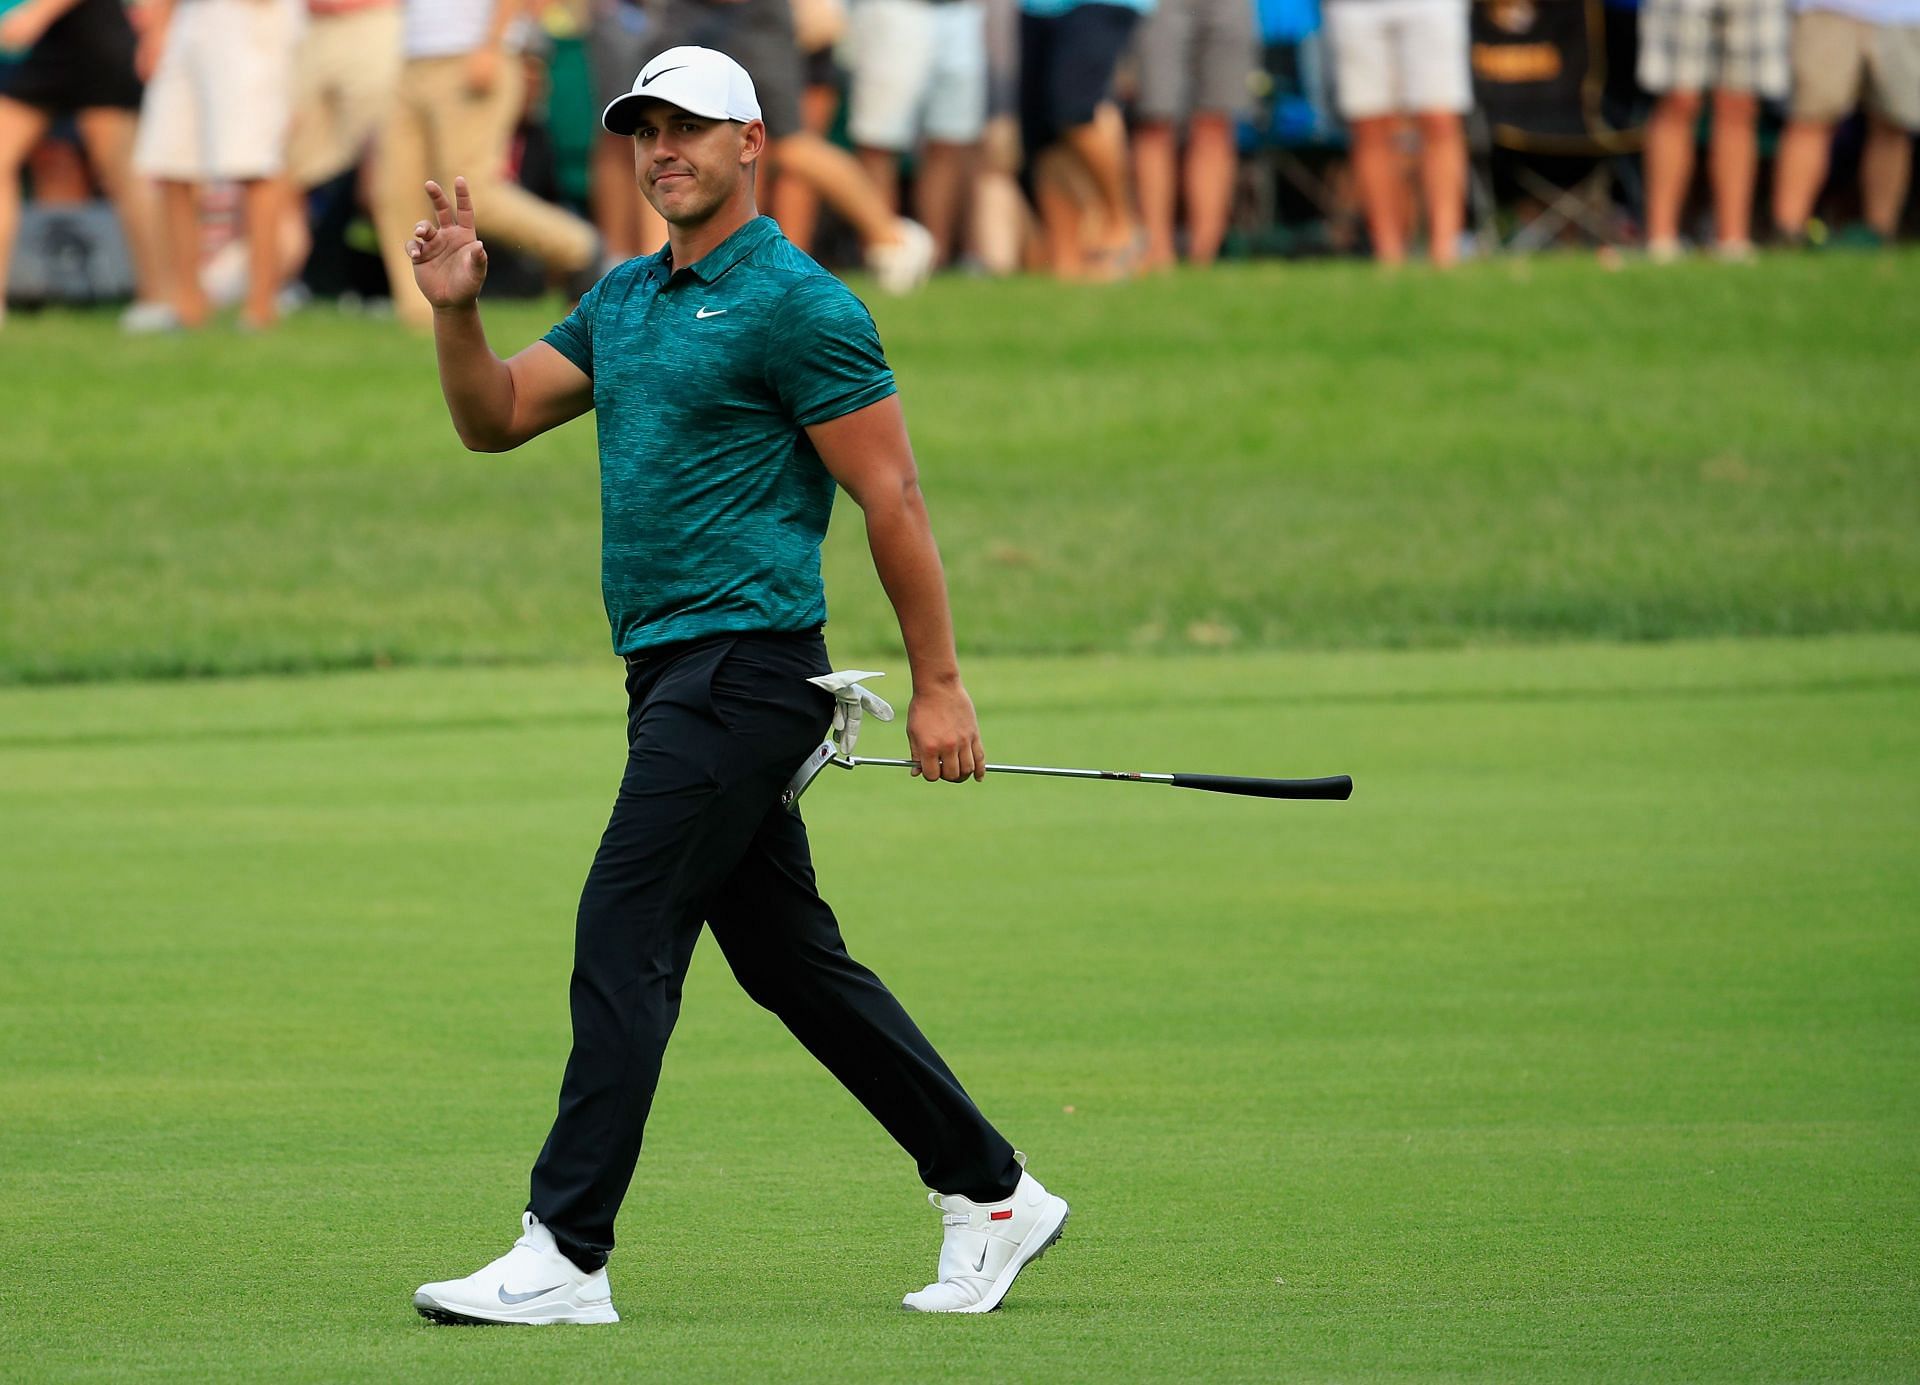 Brooks Koepka after setting his PGA Championship absolute scorin record. 2018. (Image via Getty).